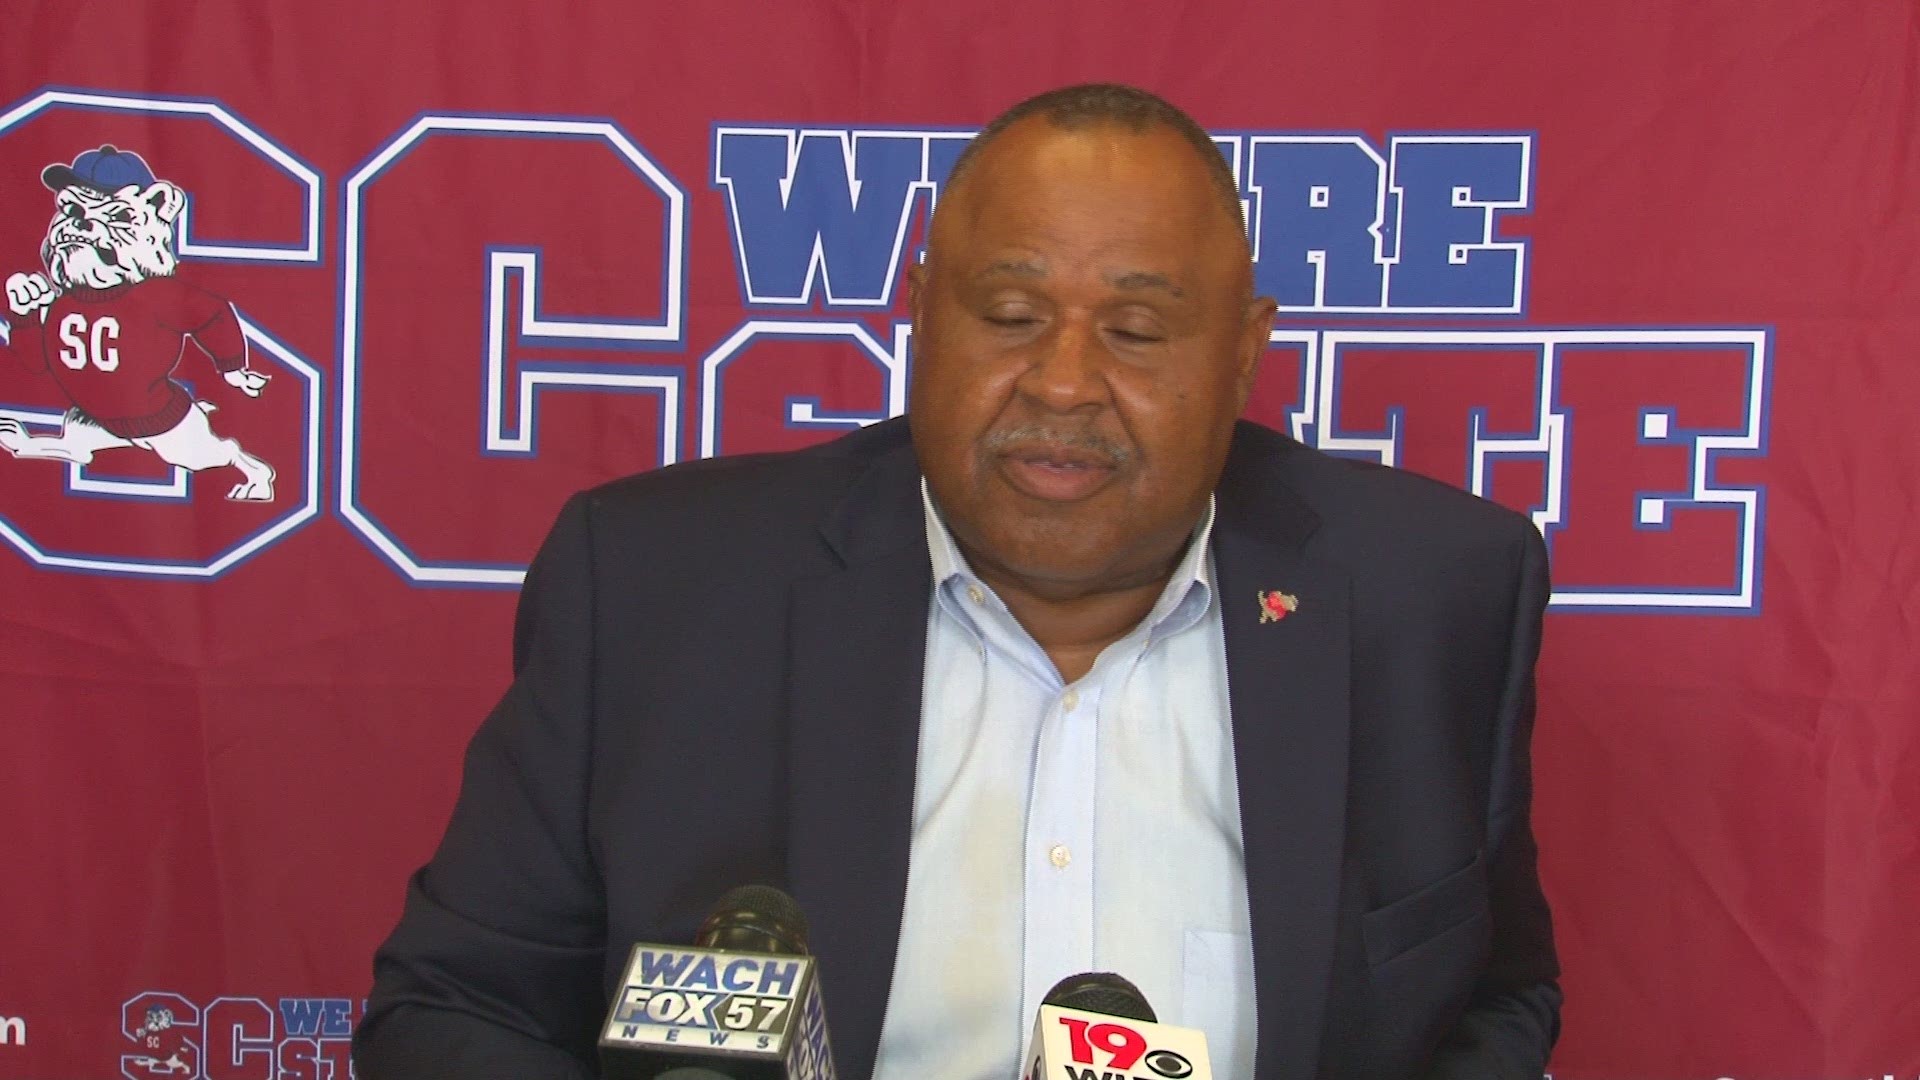 The SC State Bulldogs are scheduled to play North Carolina Central this Saturday for their first home game of the year but that could be threatened by Hurricane Florence. Head Coach Buddy Pough details what the Bulldogs will do if Florence impacts the gam